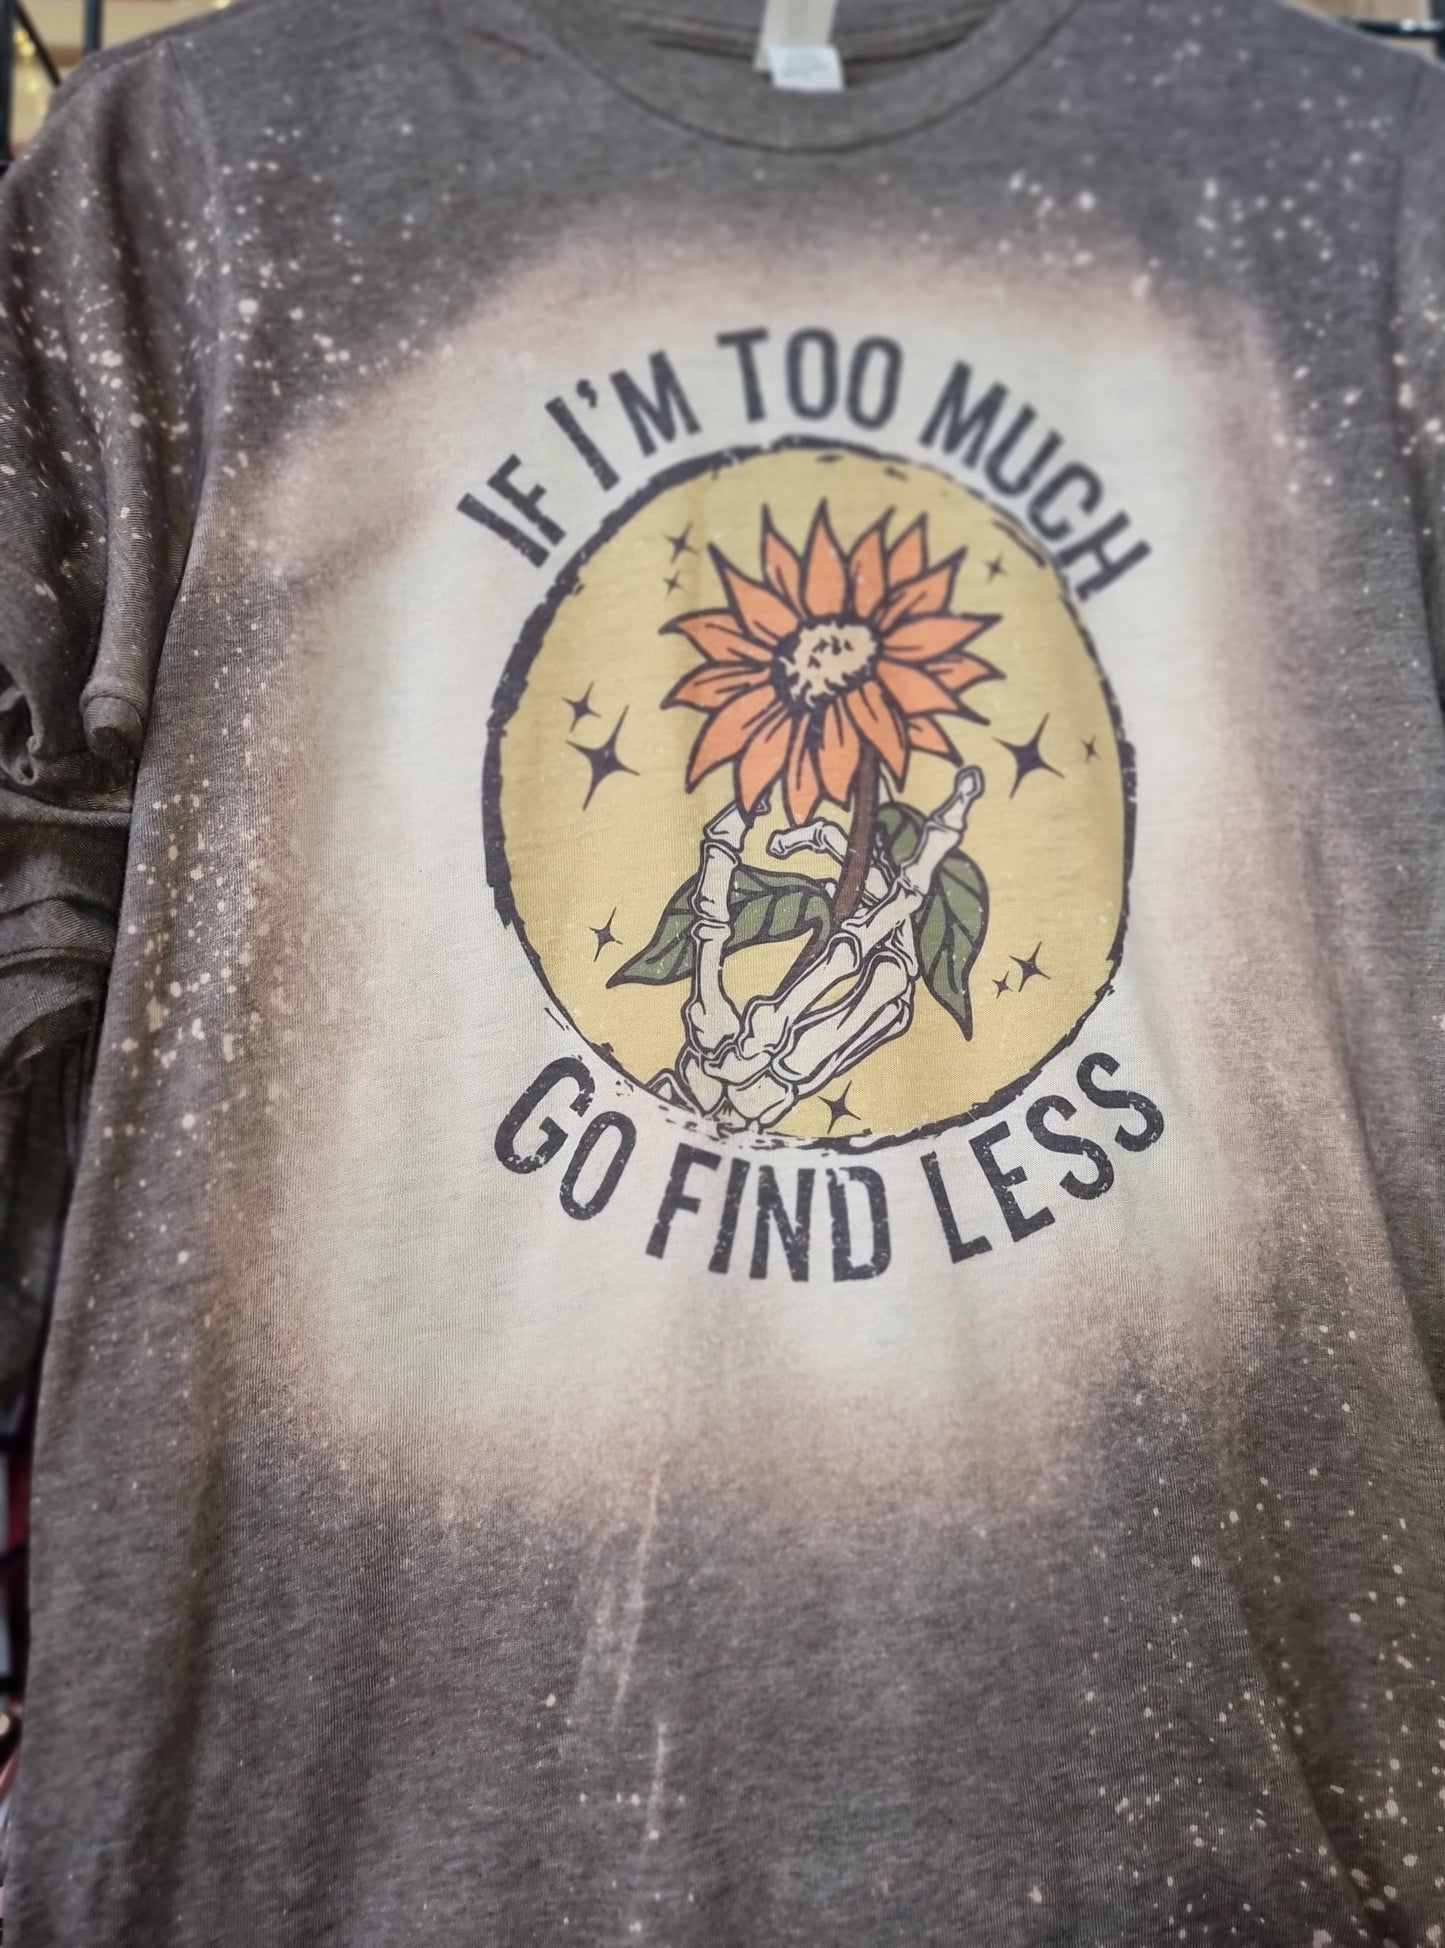 If I'm Too Much Go Find Less